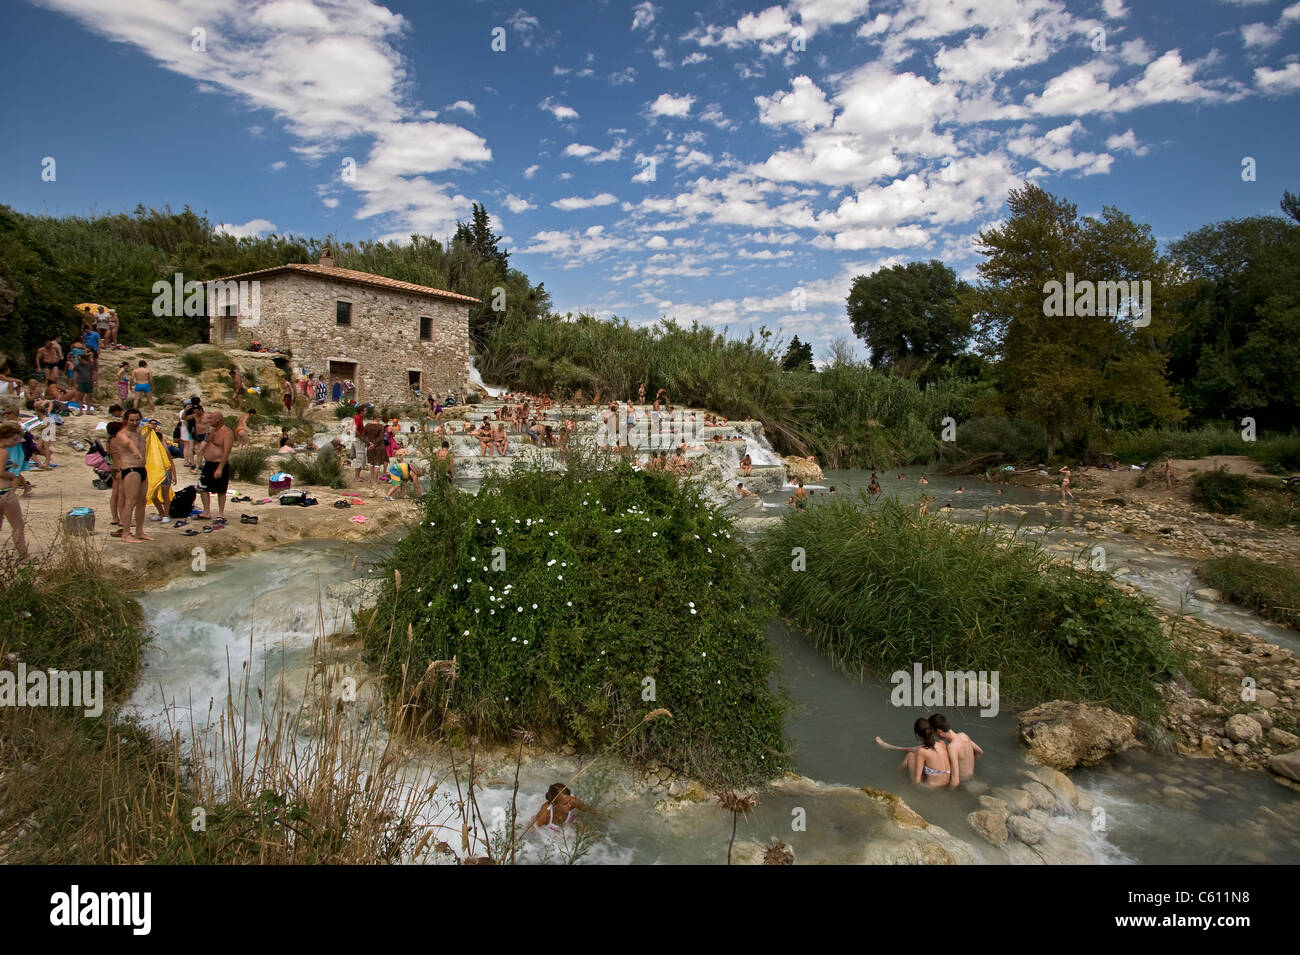 Saturnia spa Banque D'Images